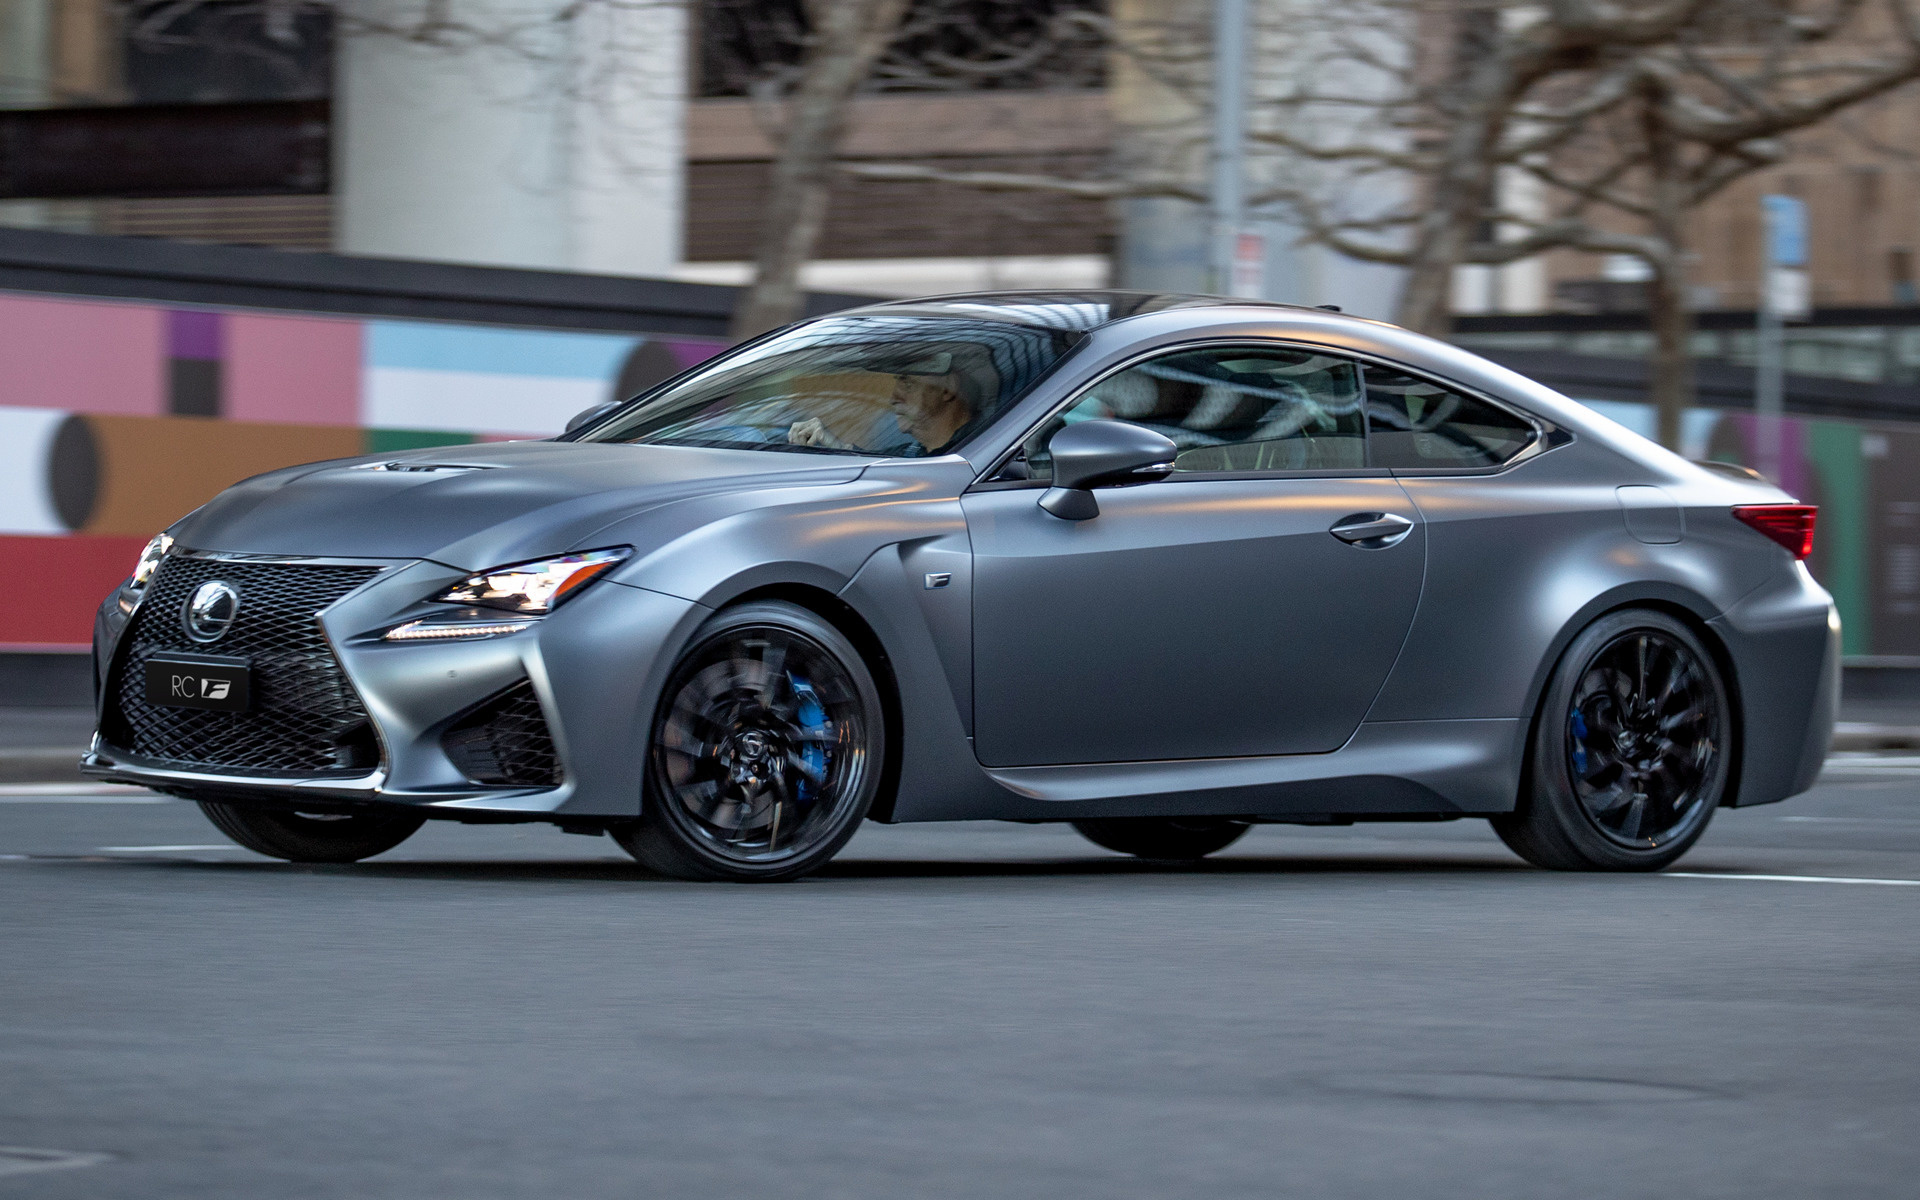 Lexus RC, 2018 10th anniversary, Luxury sports coupe, Limited edition, 1920x1200 HD Desktop